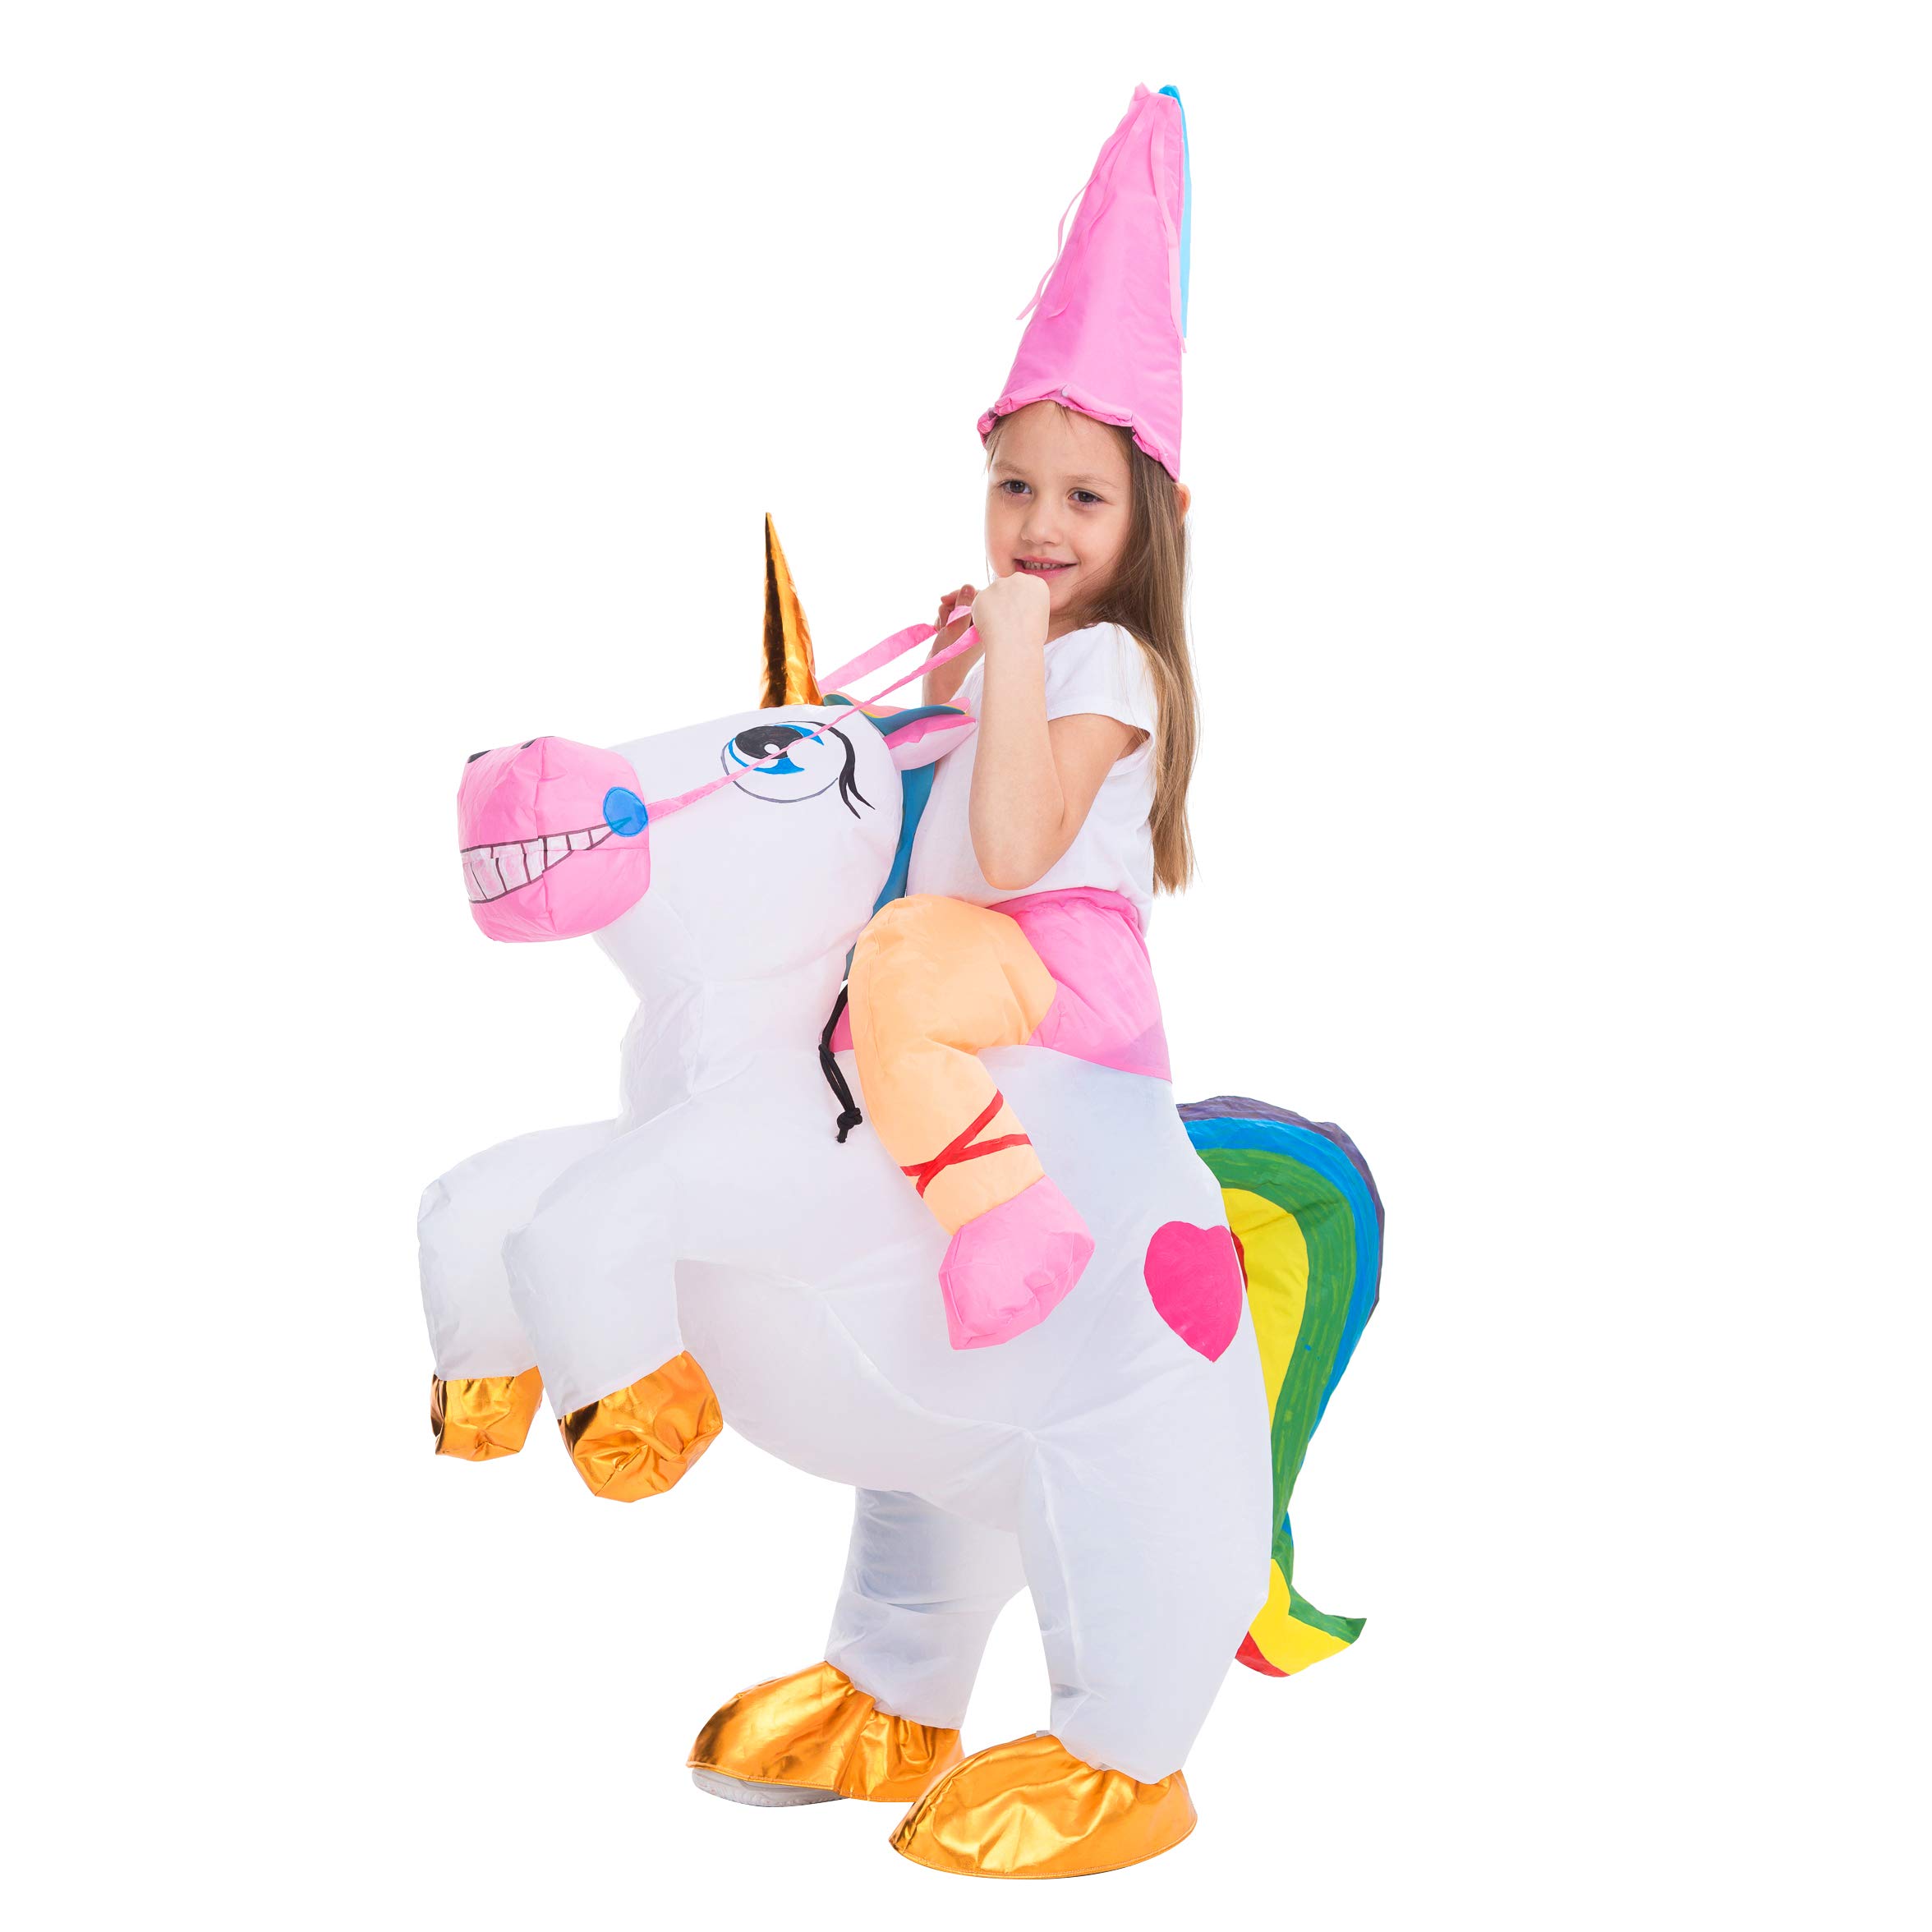 Spooktacular Creations Inflatable Costume Riding a Unicorn Air Blow-up Deluxe Halloween Costume